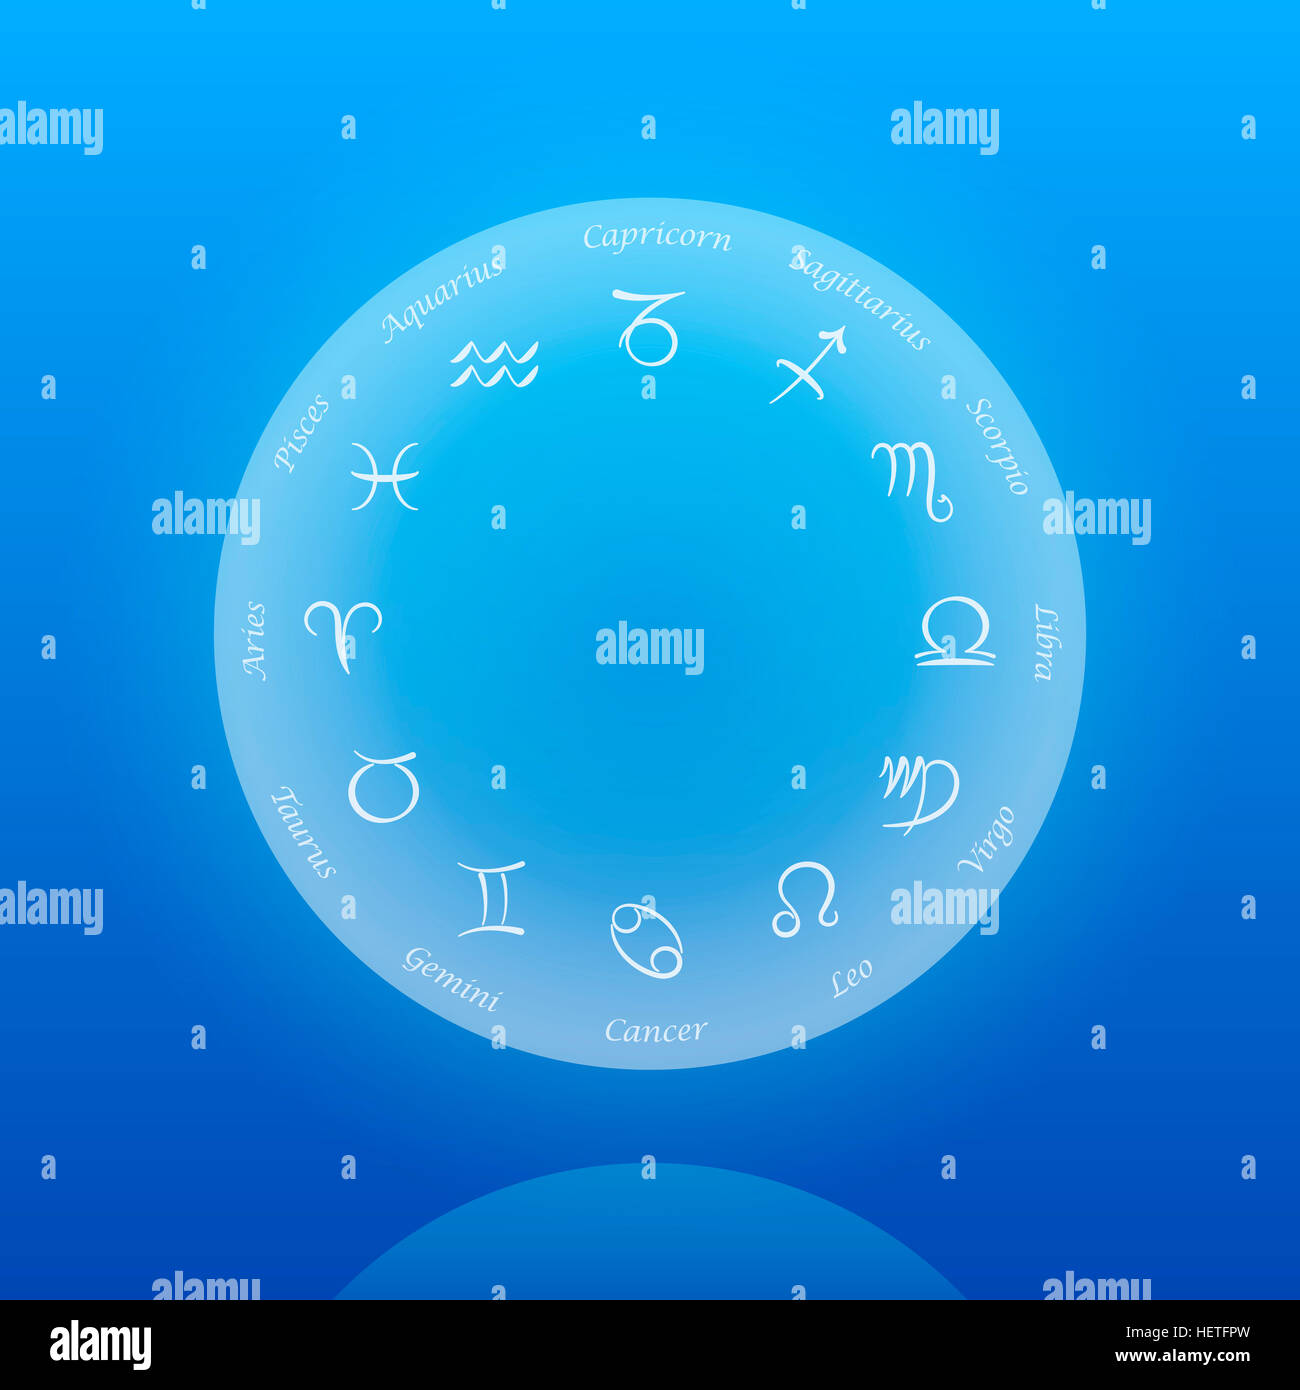 Horoscope - astrology sings of the zodiac and their names - floating sphere on blue background. Stock Photo